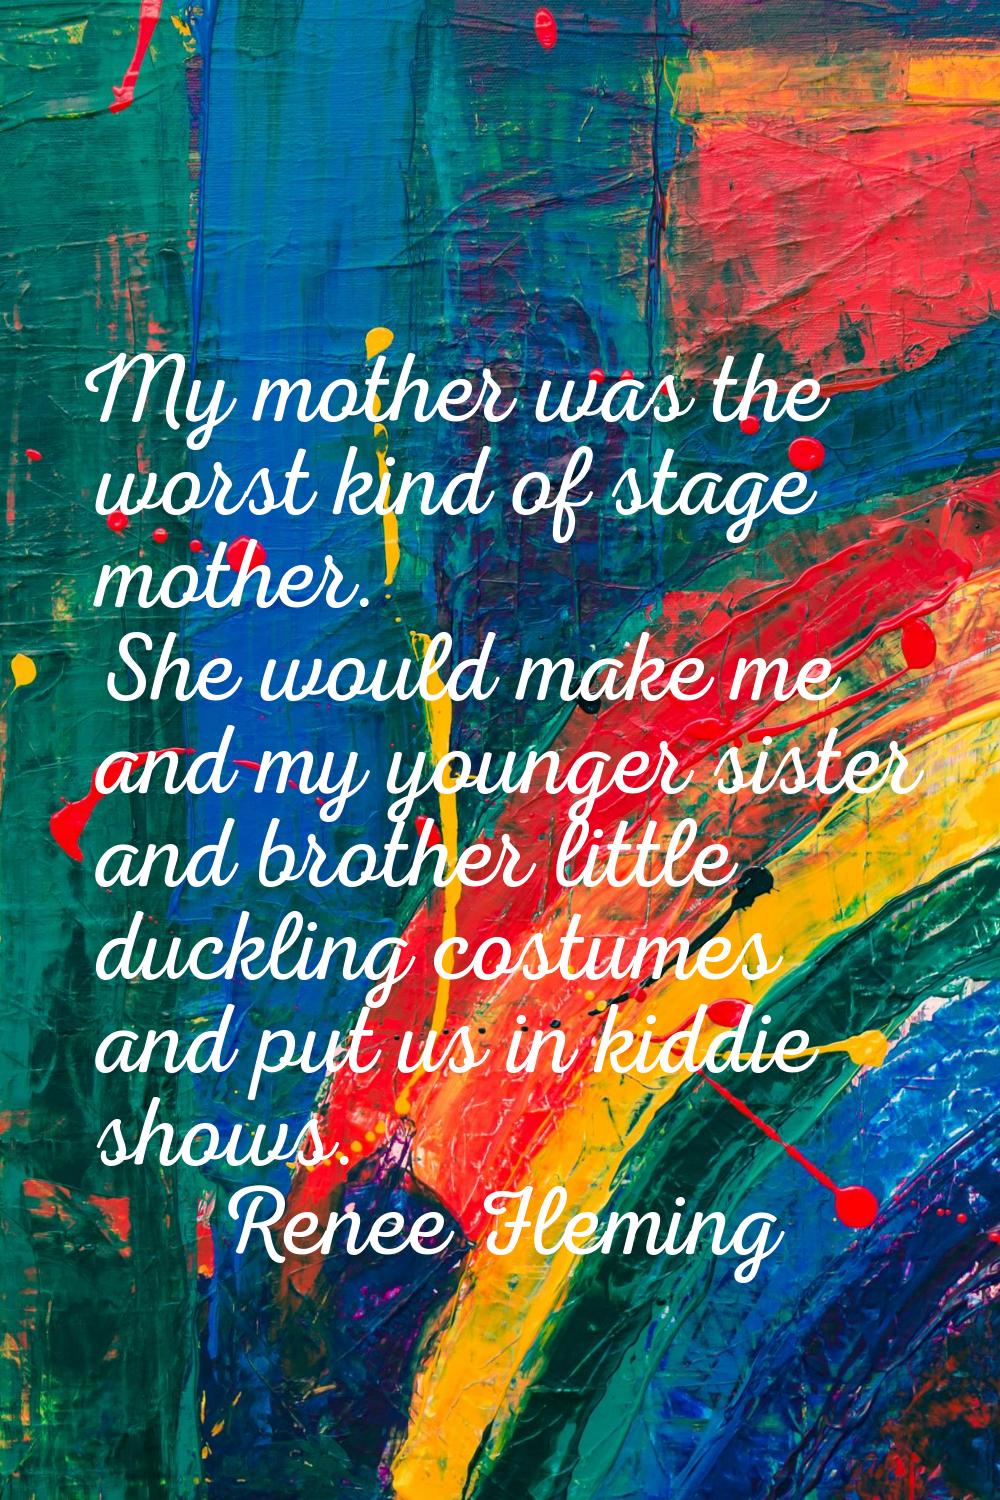 My mother was the worst kind of stage mother. She would make me and my younger sister and brother l